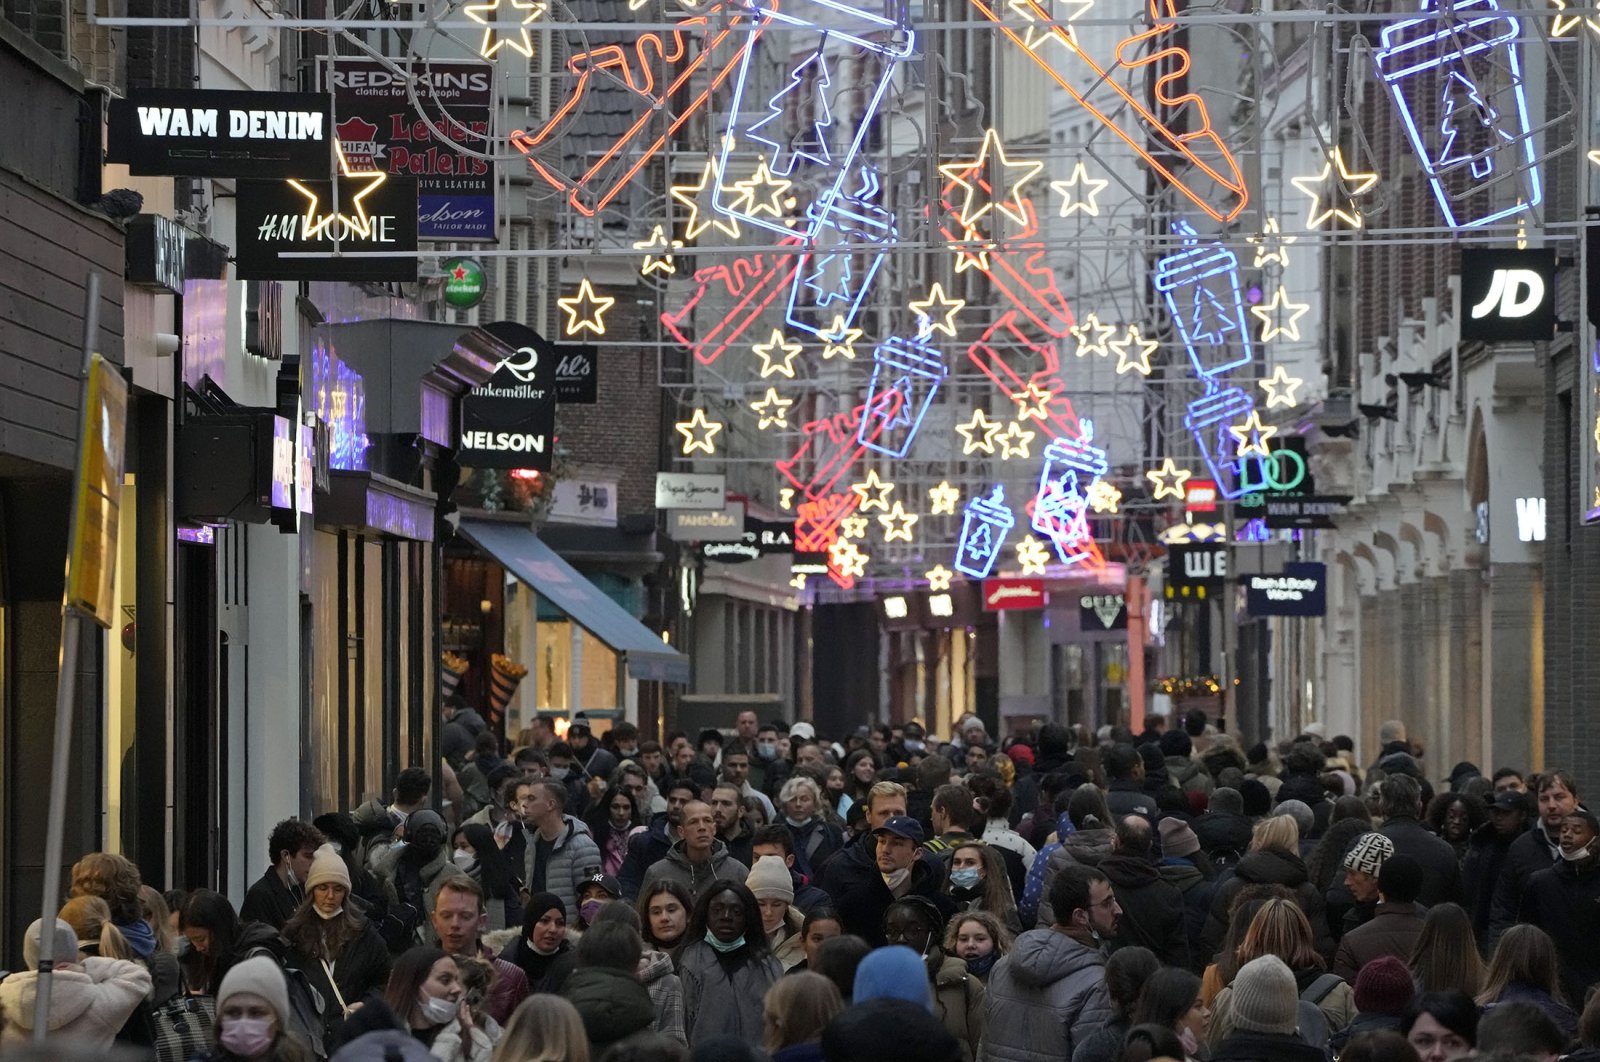 A bustling street on the last Saturday before Christmas in Amsterdam, the Netherlands, Dec. 18, 2021. (AP Photo)